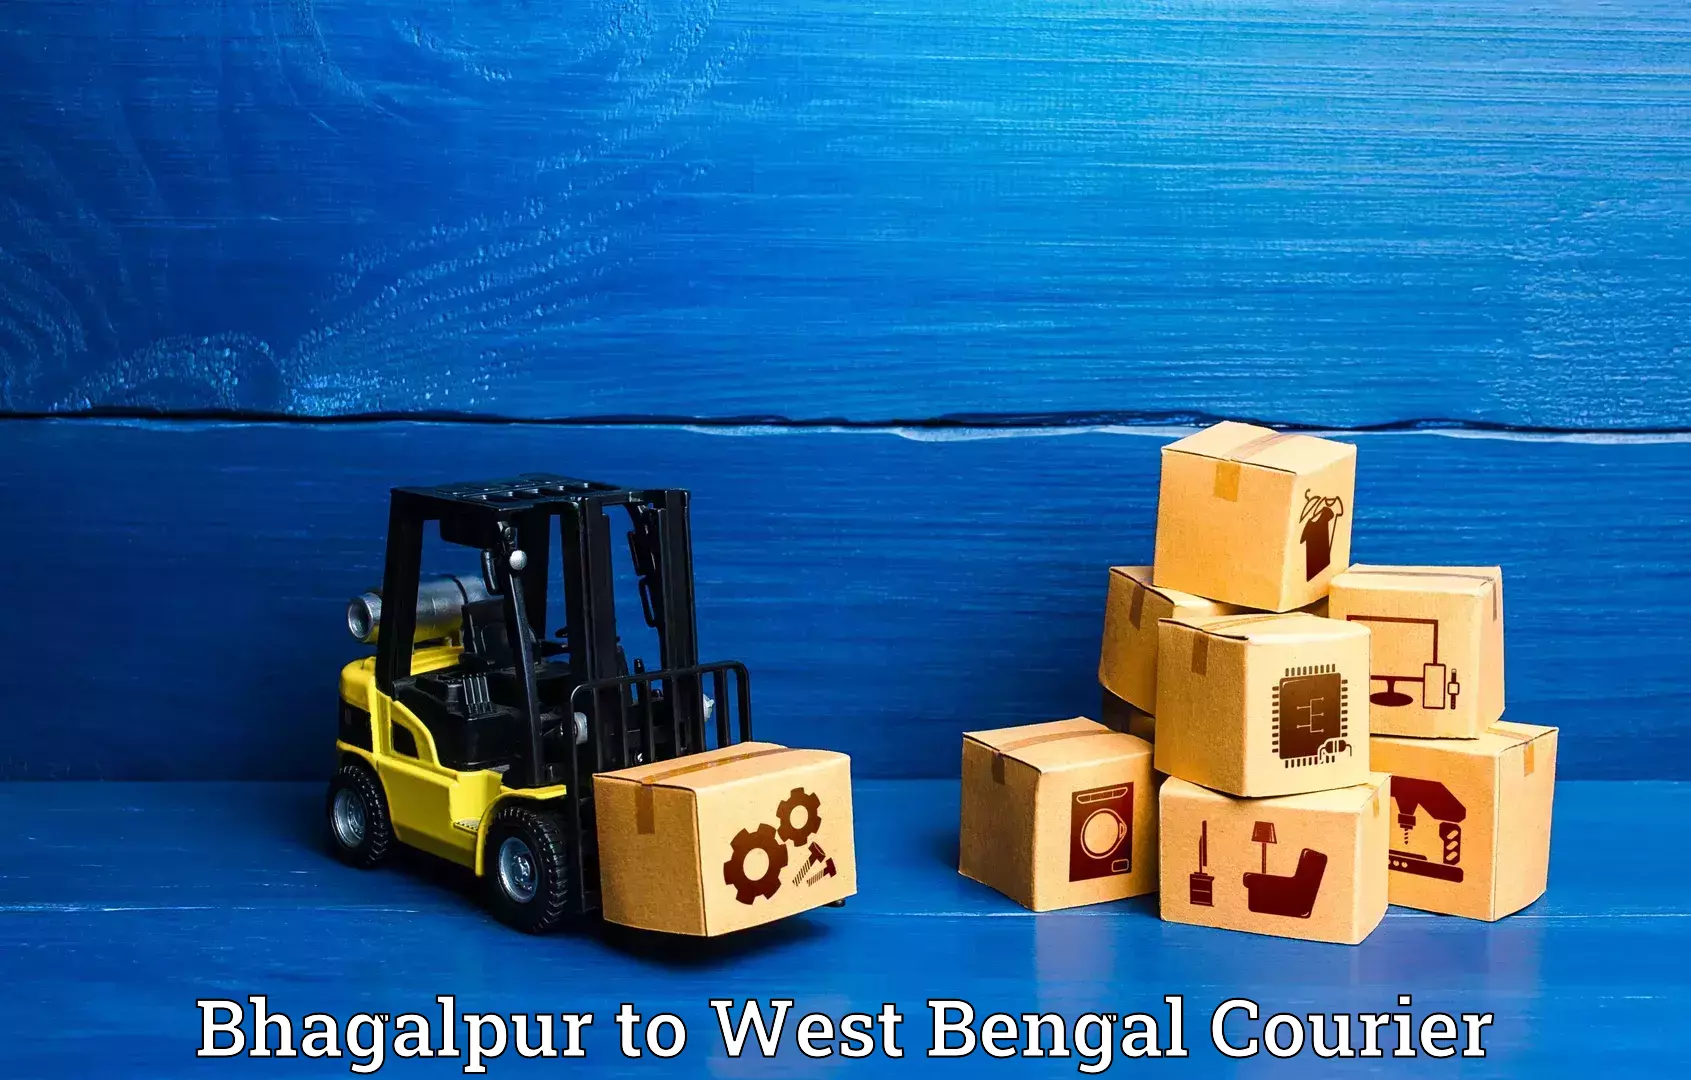 Baggage delivery scheduling Bhagalpur to West Bengal